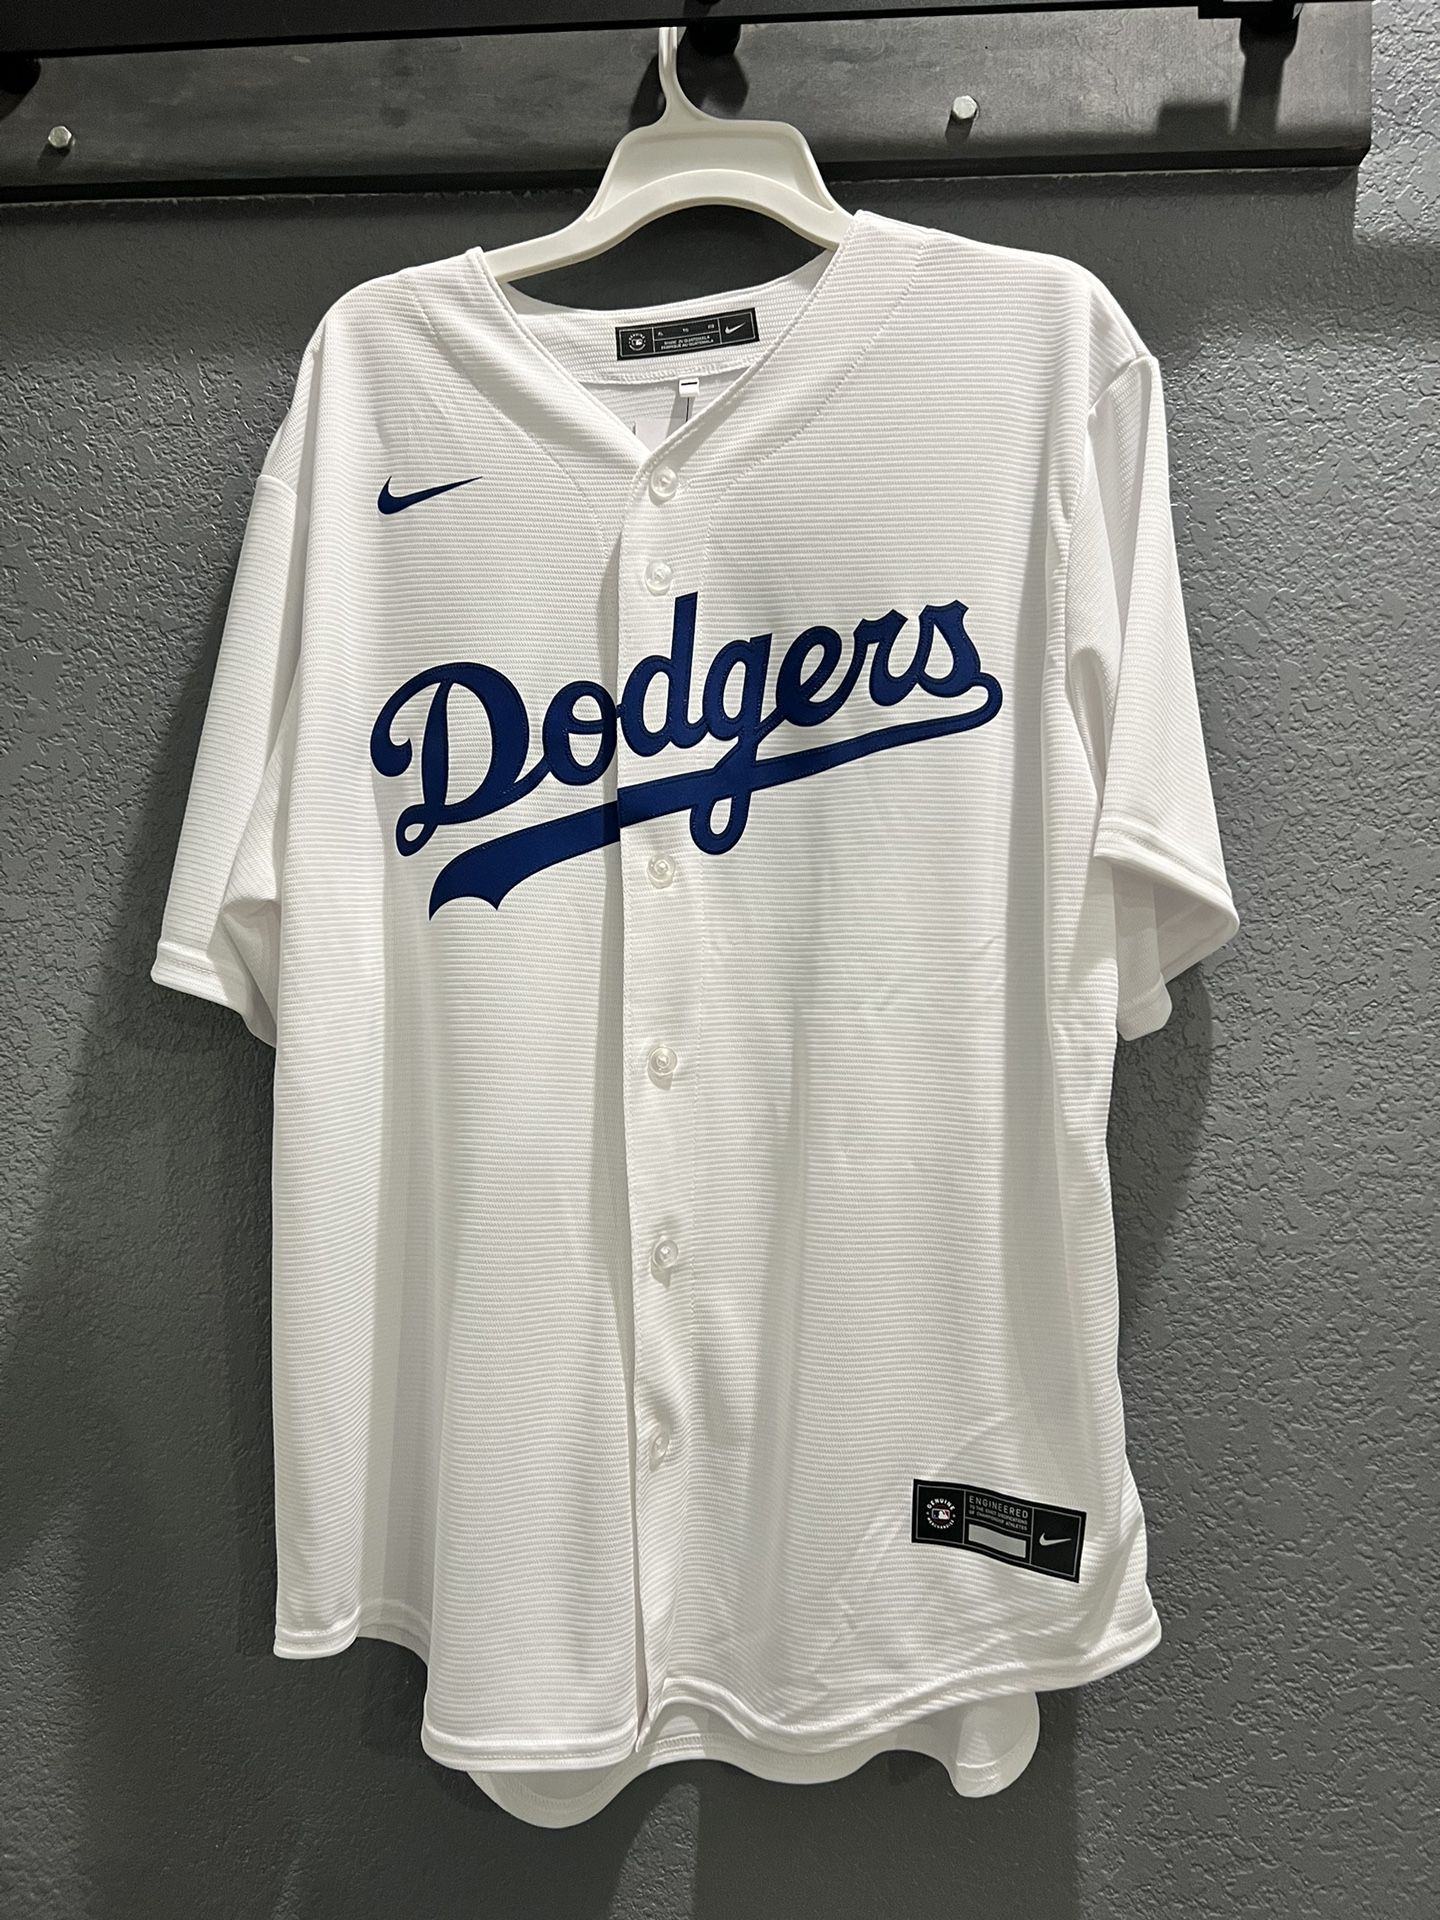 White Dodgers Jersey for Sale in Hesperia, CA - OfferUp